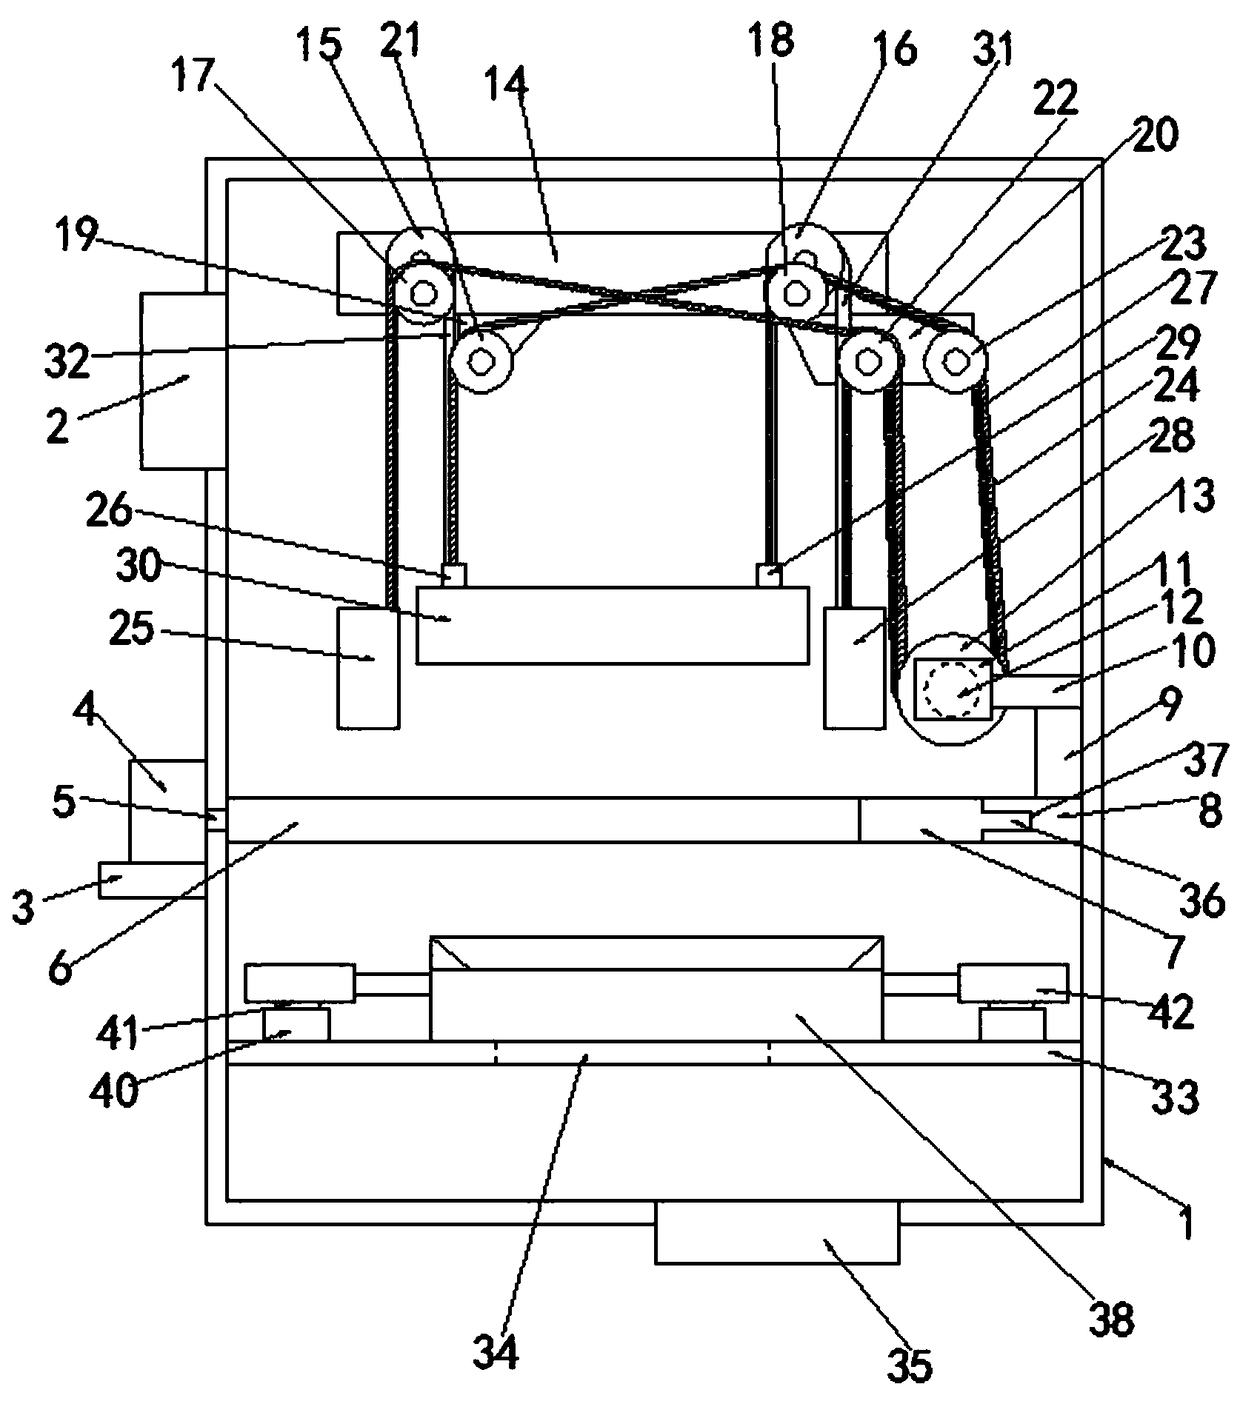 Mashing device applicable to processing and production process